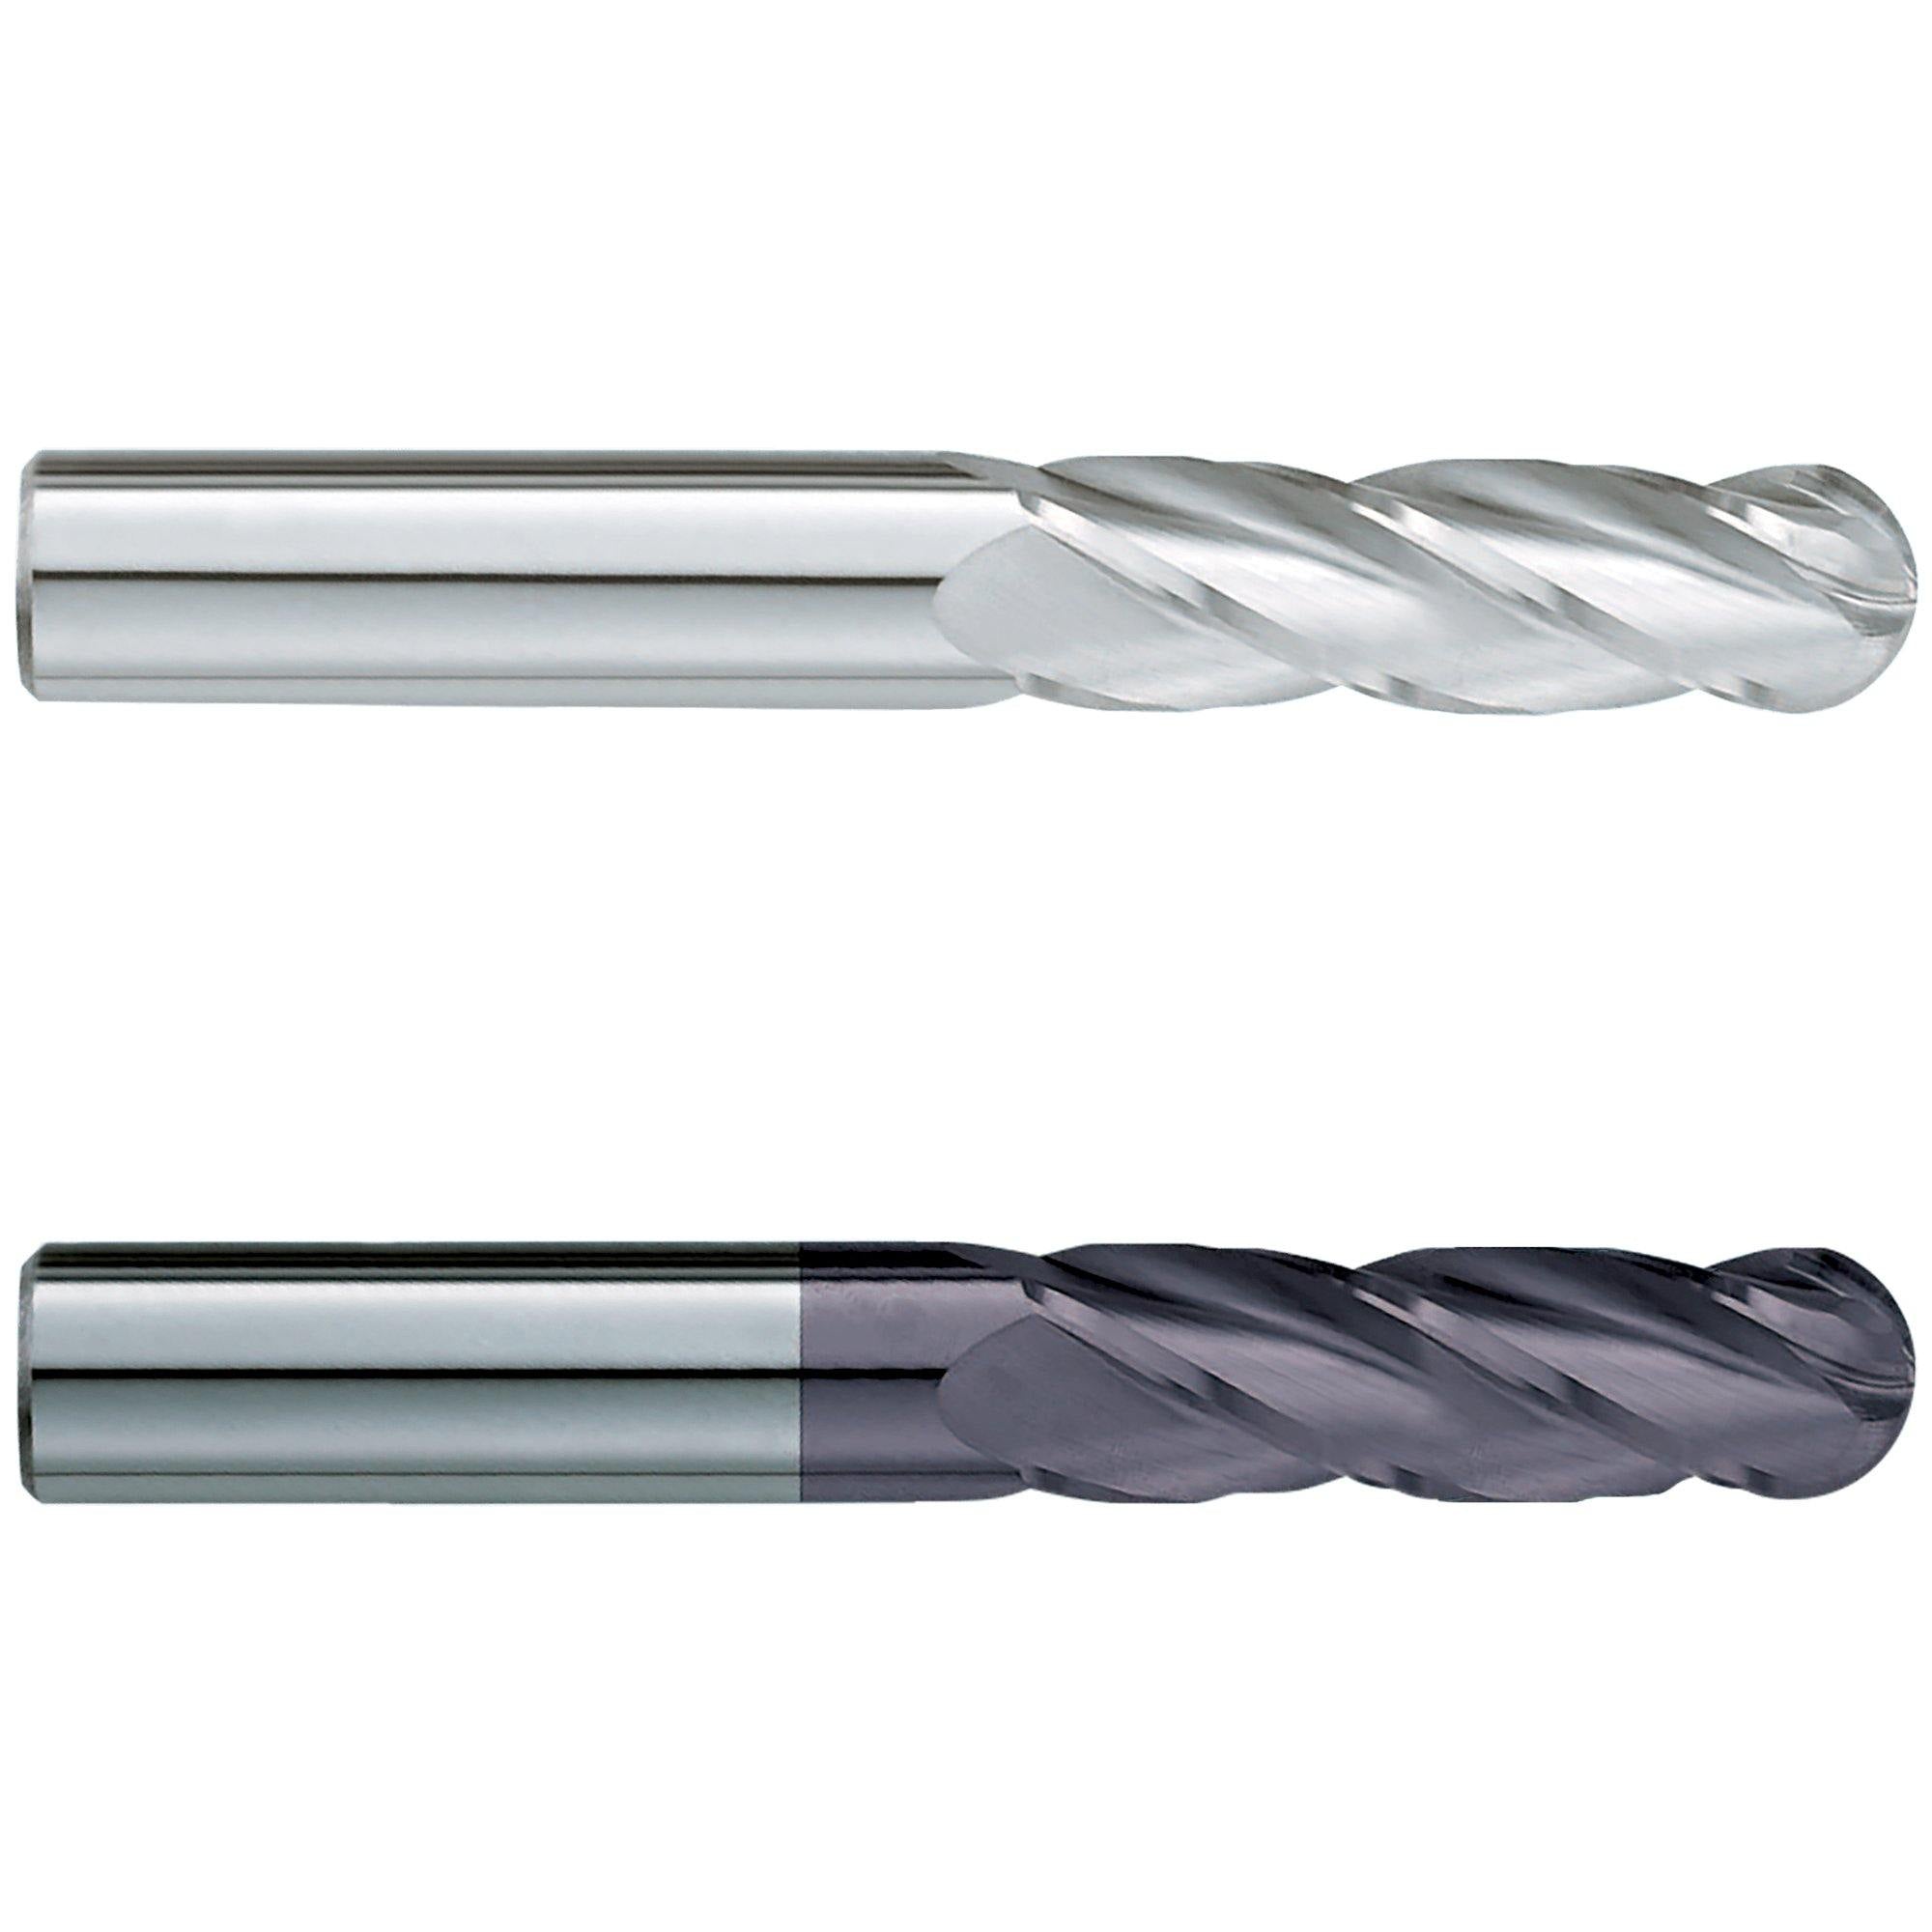 (2 Pack) 1" x 7" x 10" Super Long Ballnose Carbide End Mill - The End Mill Store 